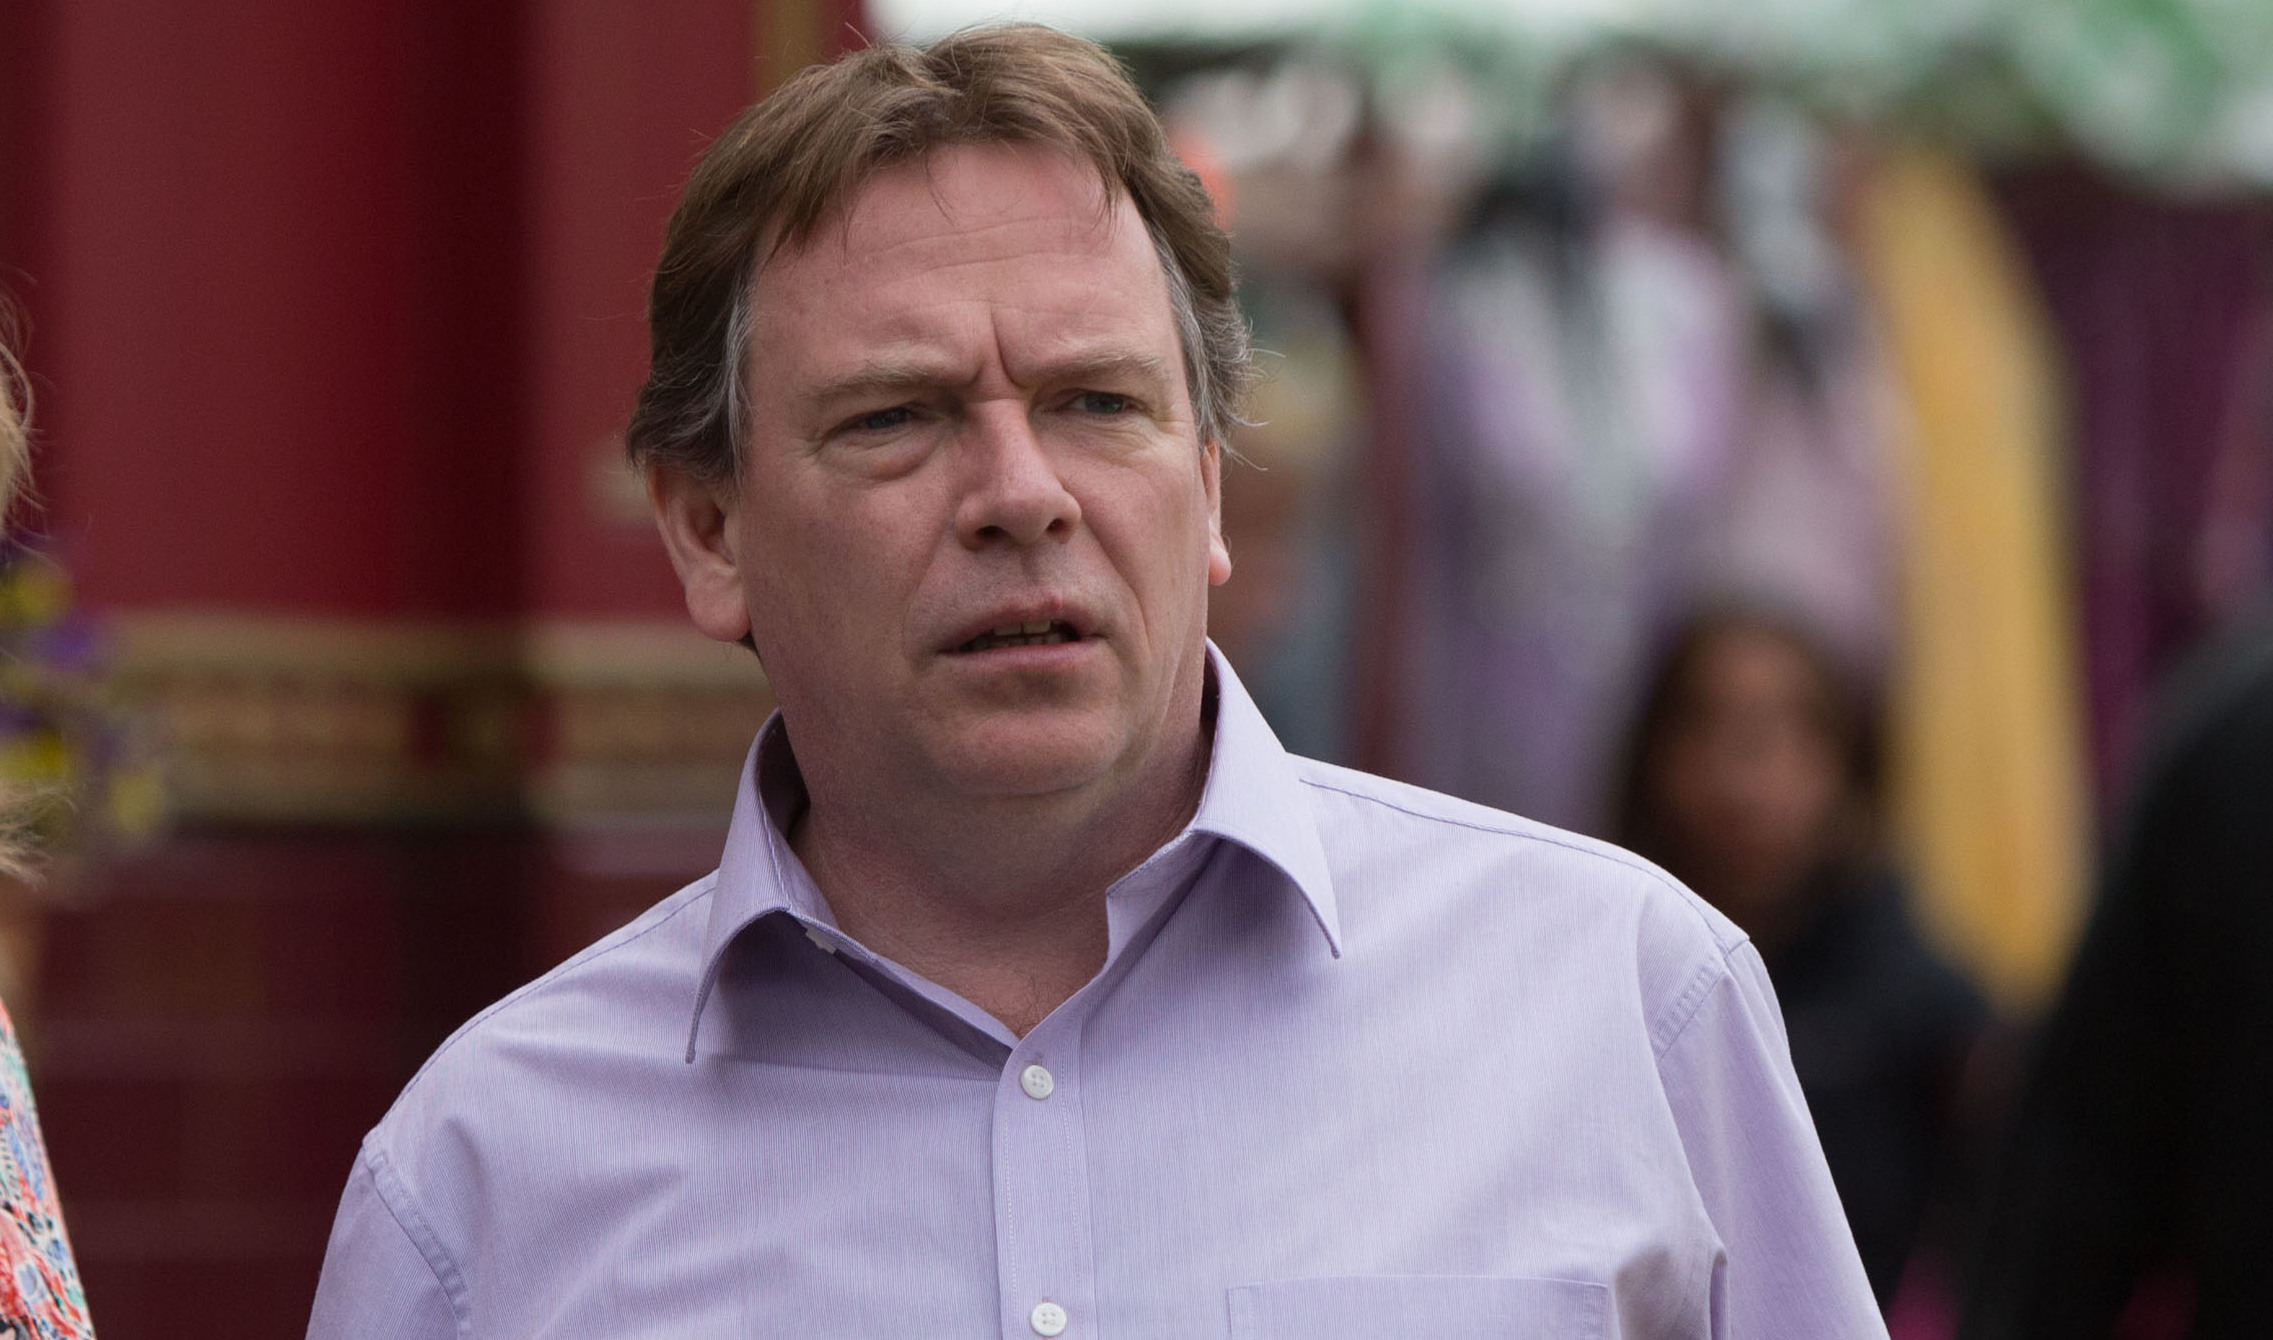 WARNING: Embargoed for publication until 07/07/2015 - Programme Name: EastEnders - TX: 17/07/2015 - Episode: 5104 (No. n/a) - Picture Shows: Ian and Jane are shocked to see the police. Jane Beale (LAURIE BRETT), Ian Beale (ADAM WOODYATT) - (C) BBC -